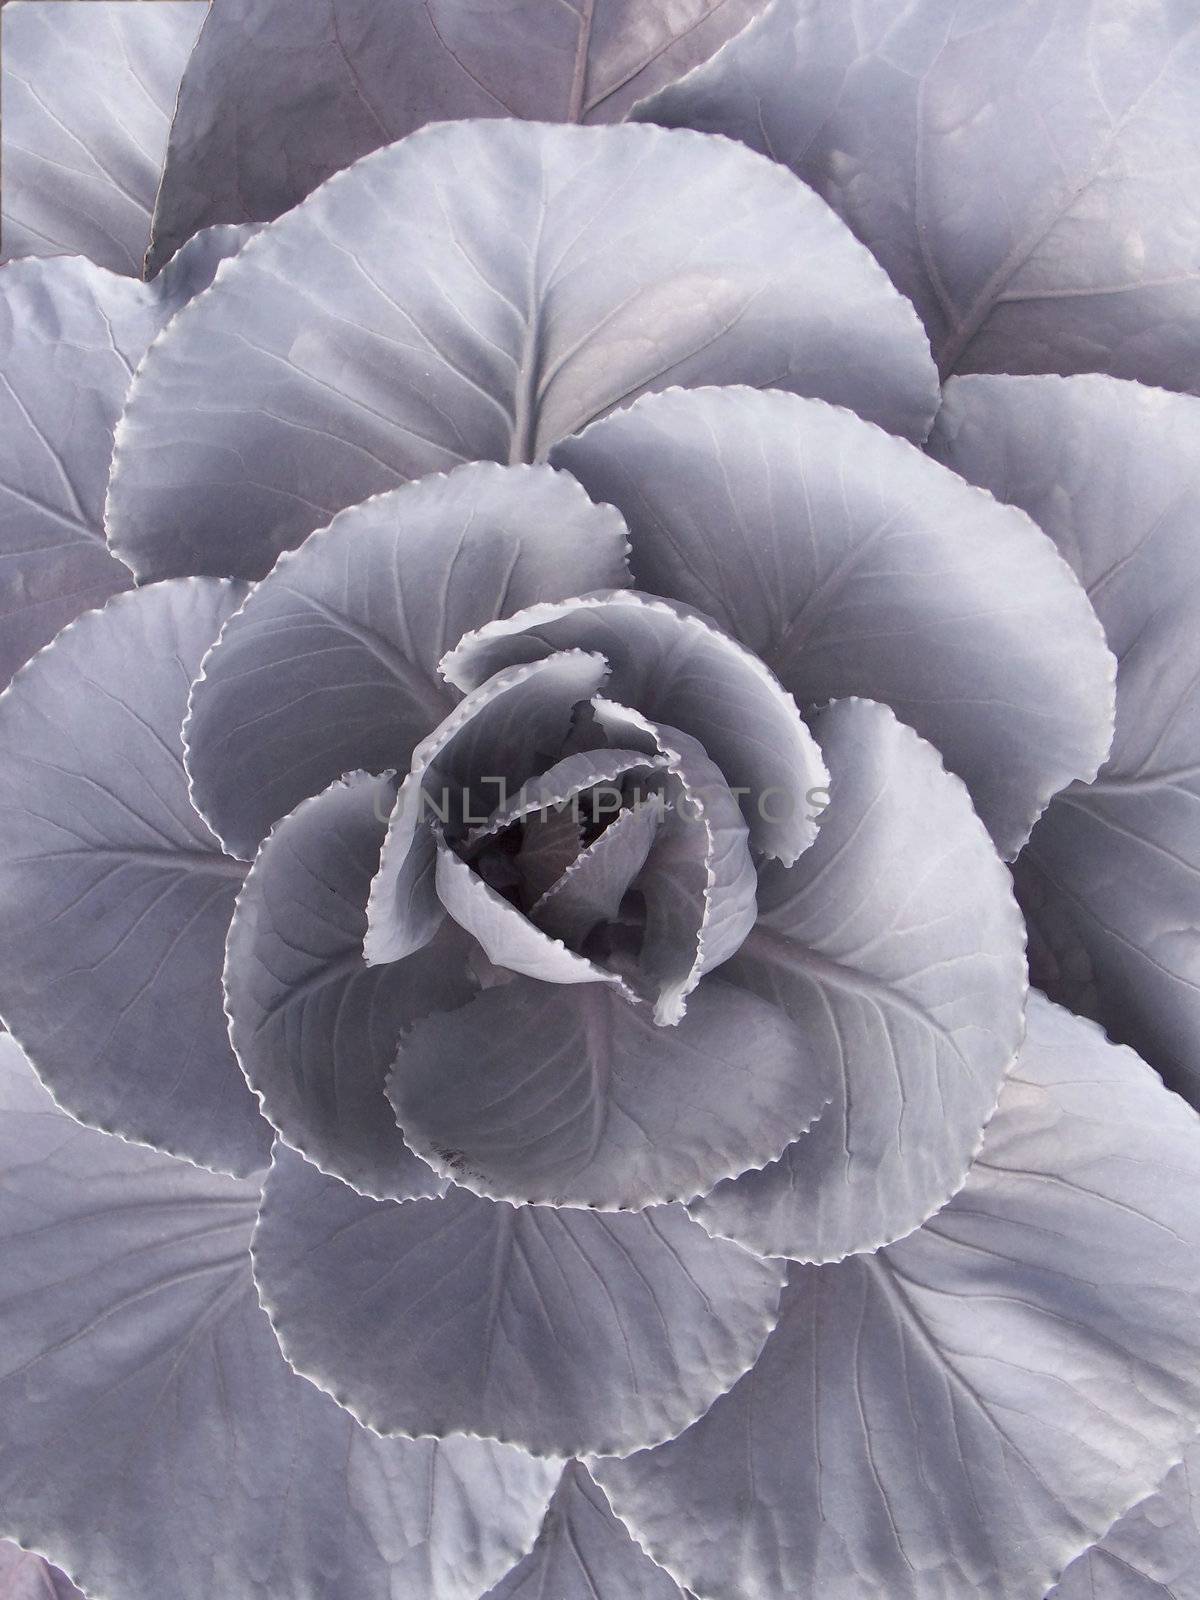 Closeup of a red cabbage - outdoor shot